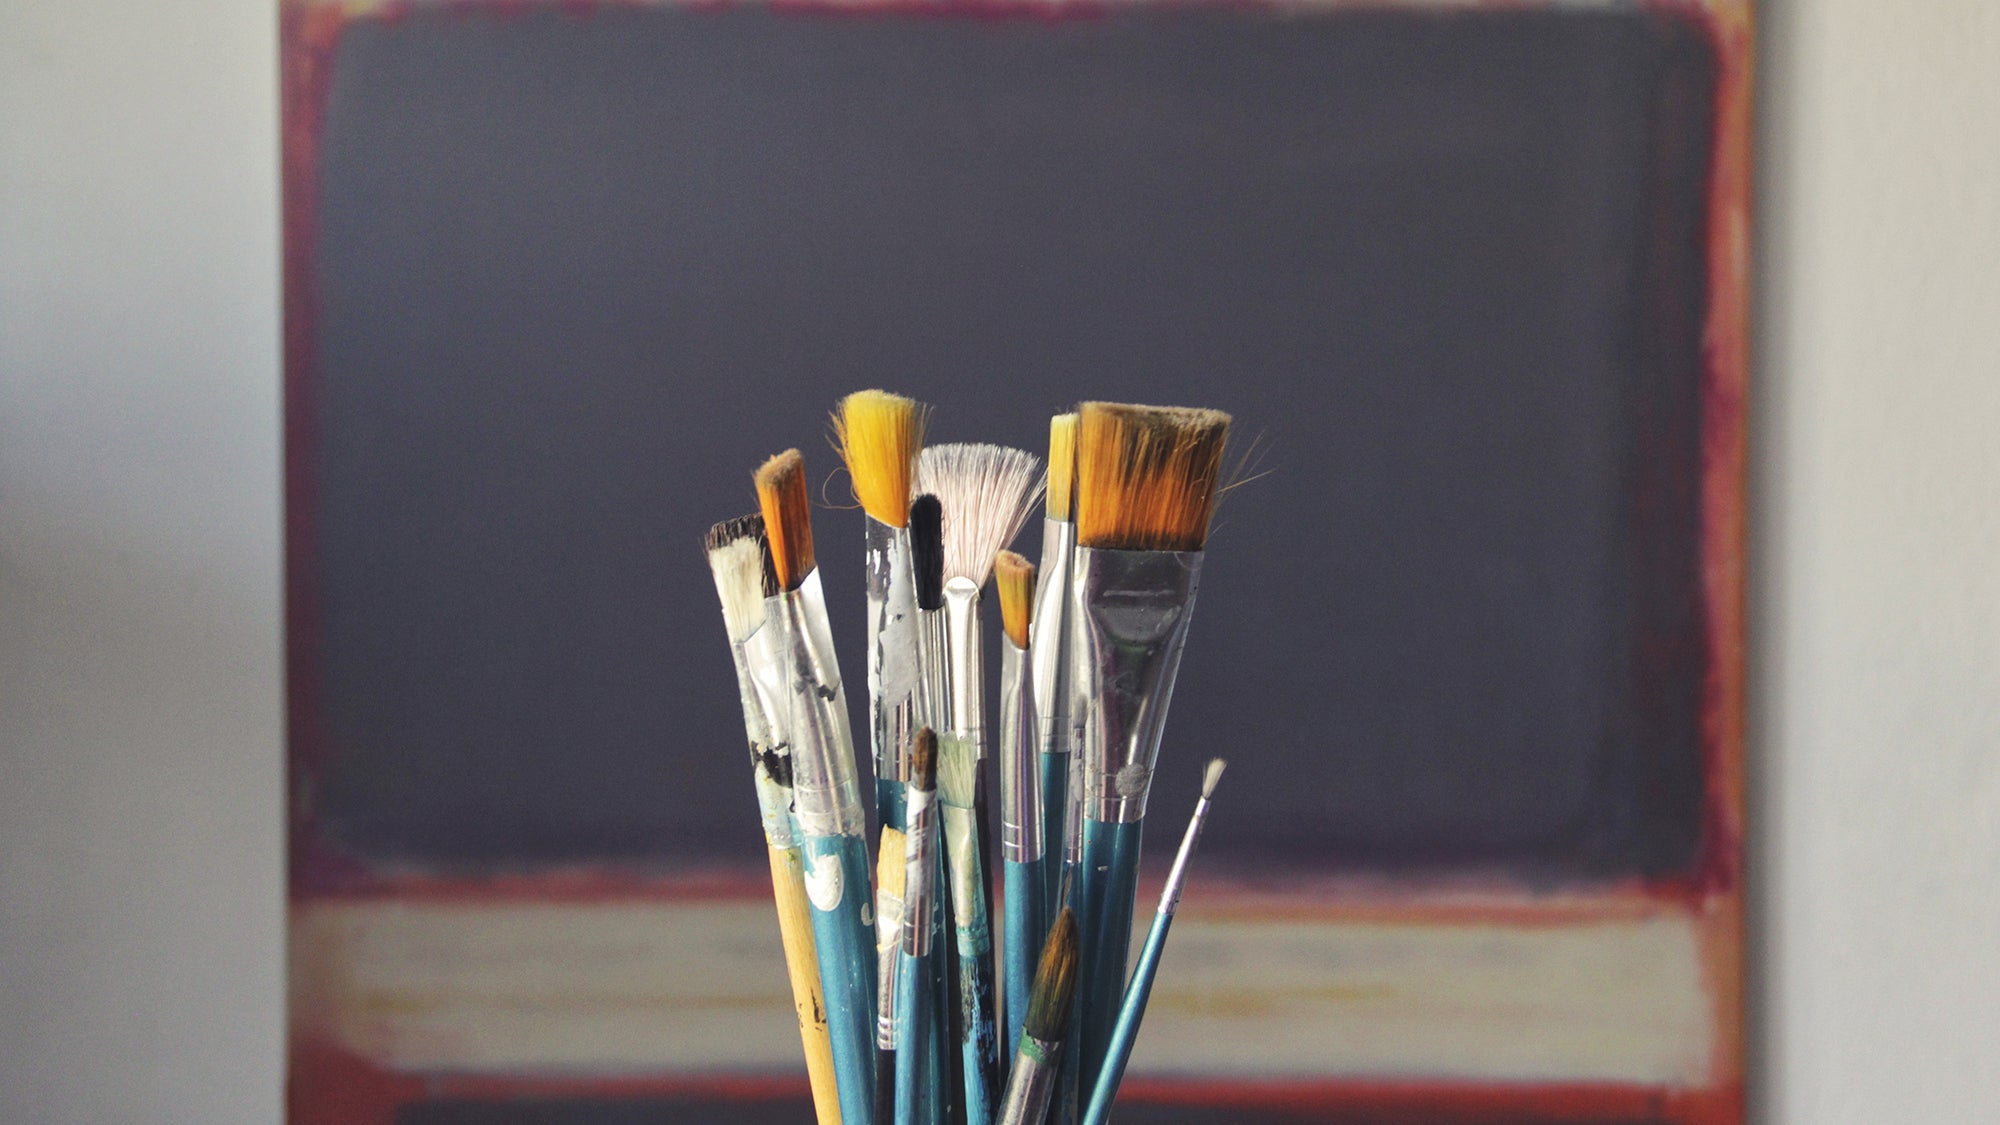 paint brushes displayed in front a piece of painted artwork